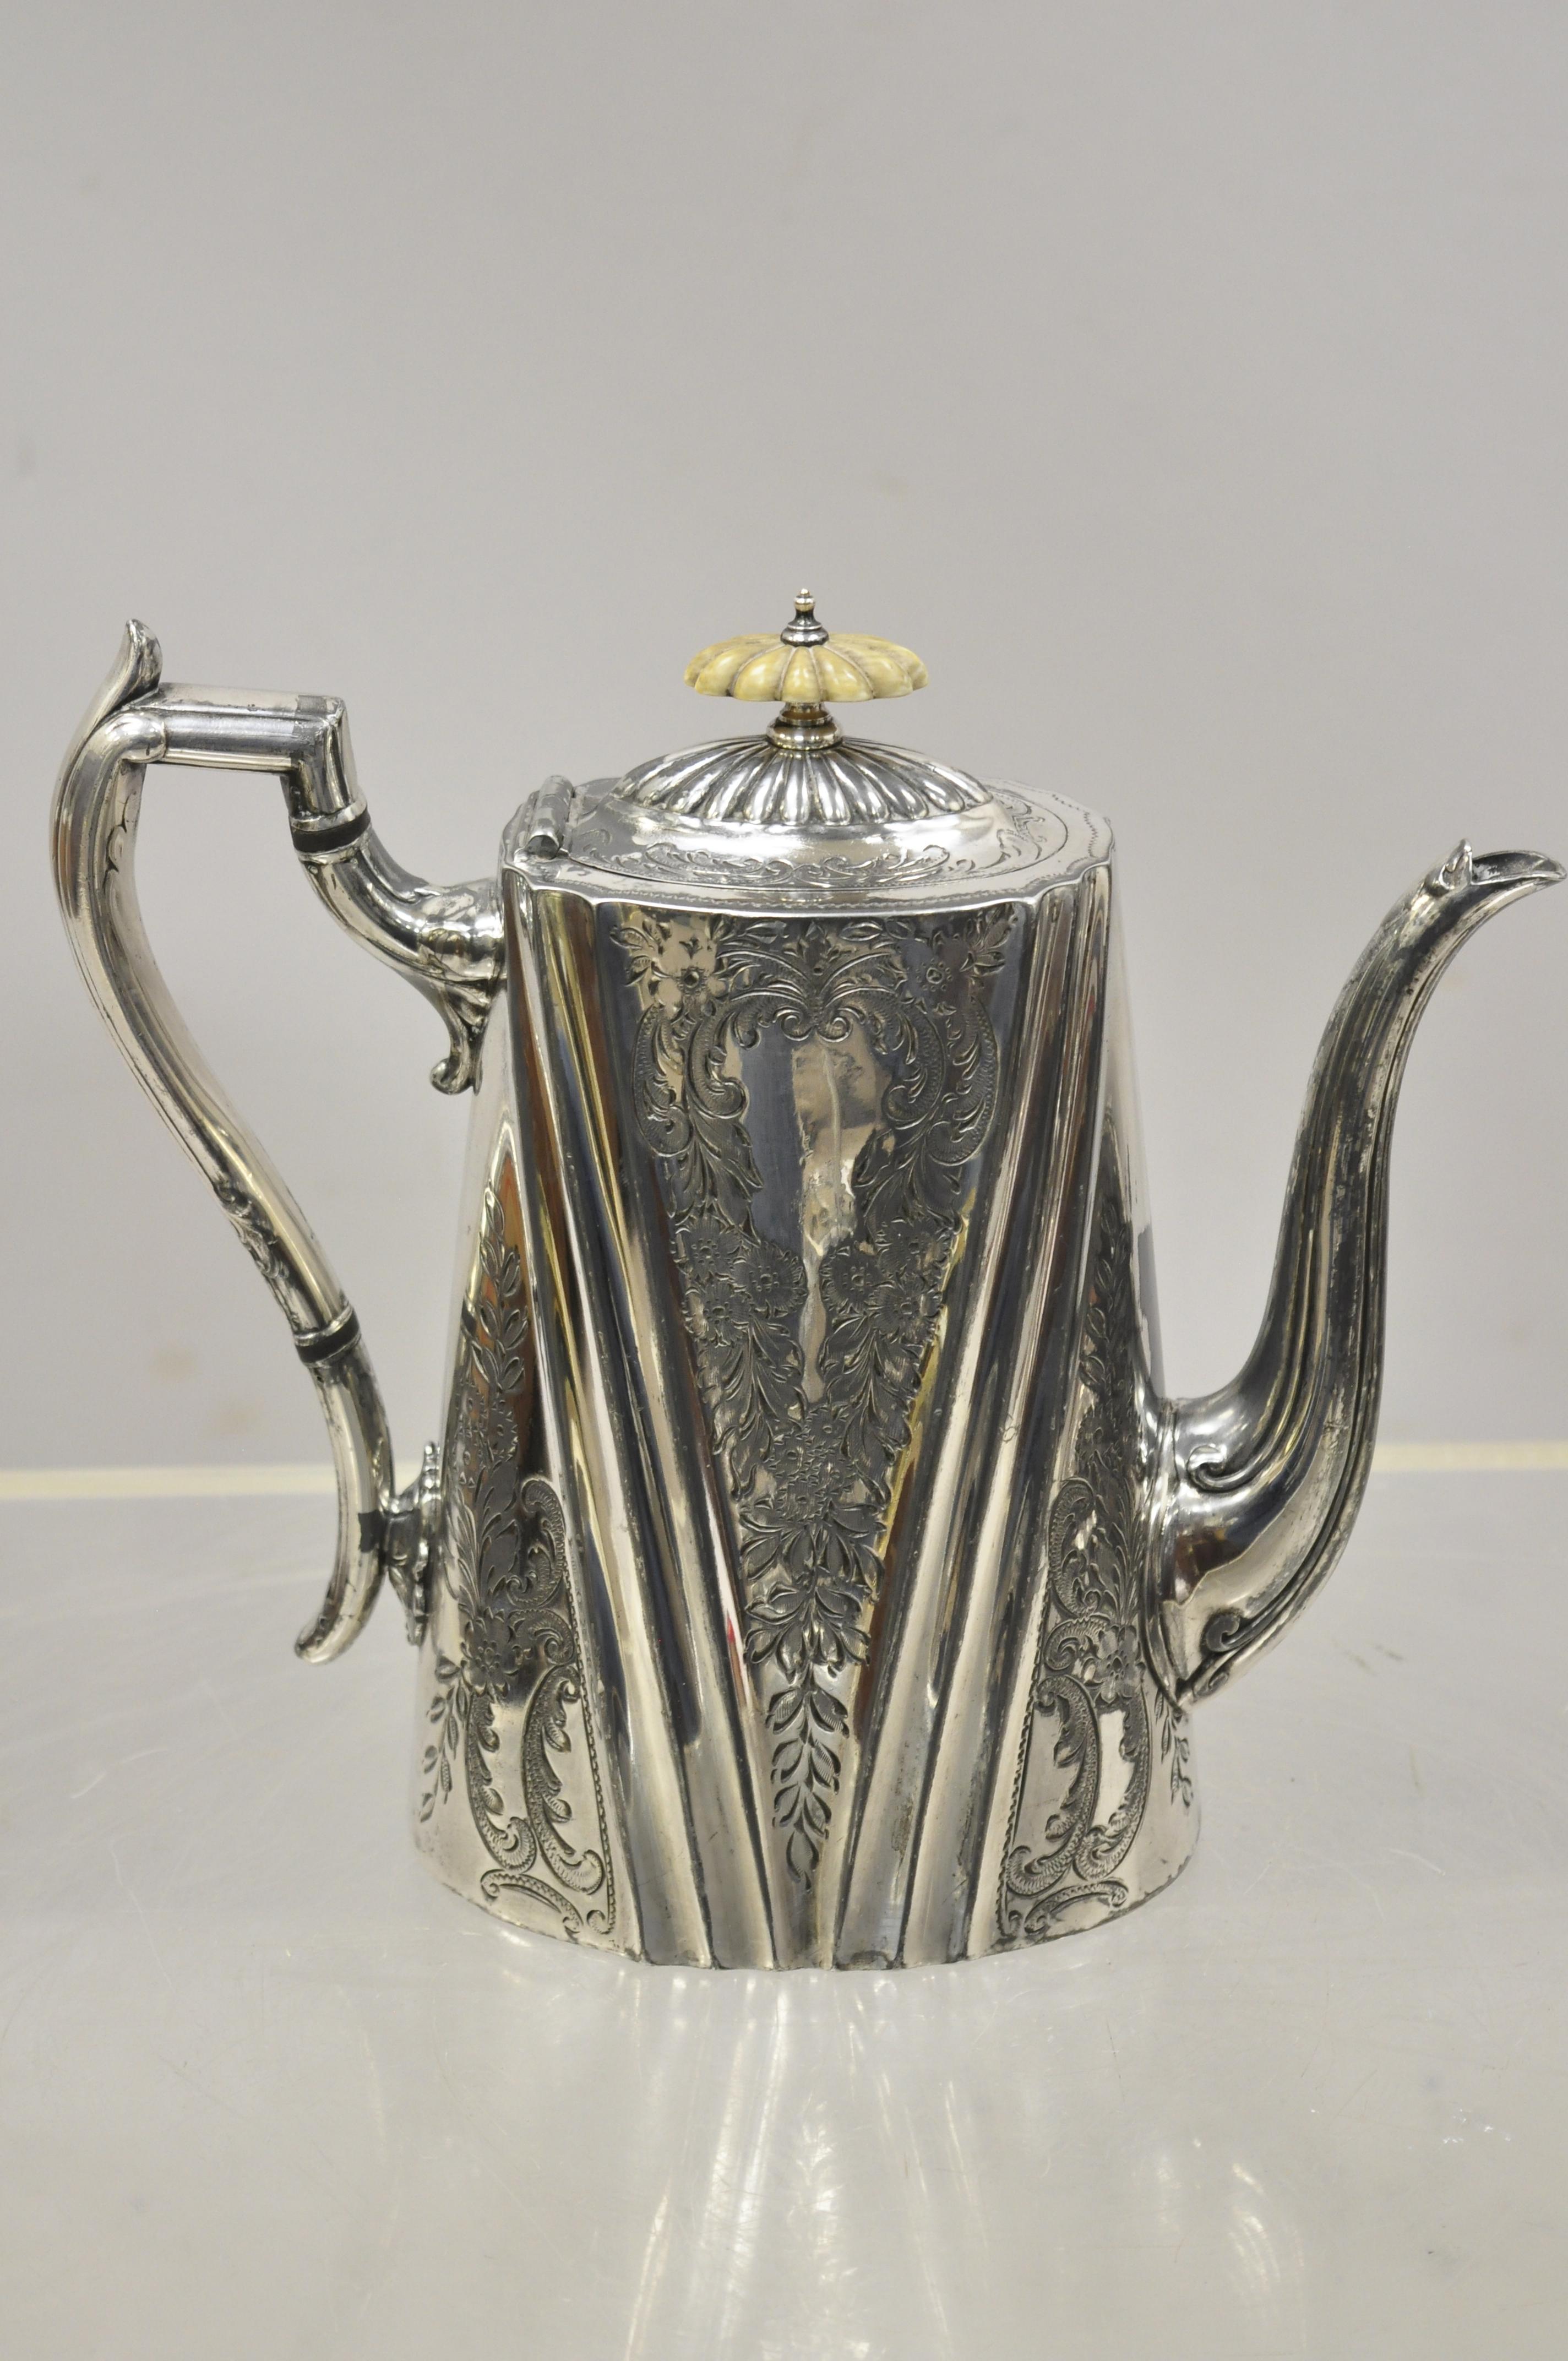 Antique English silver plated Edwardian Victorian bone handle floral coffee pot (D). Item features bone handle, floral scrollwork design, circa late 19th-early 20th century. Measurements: 8.5